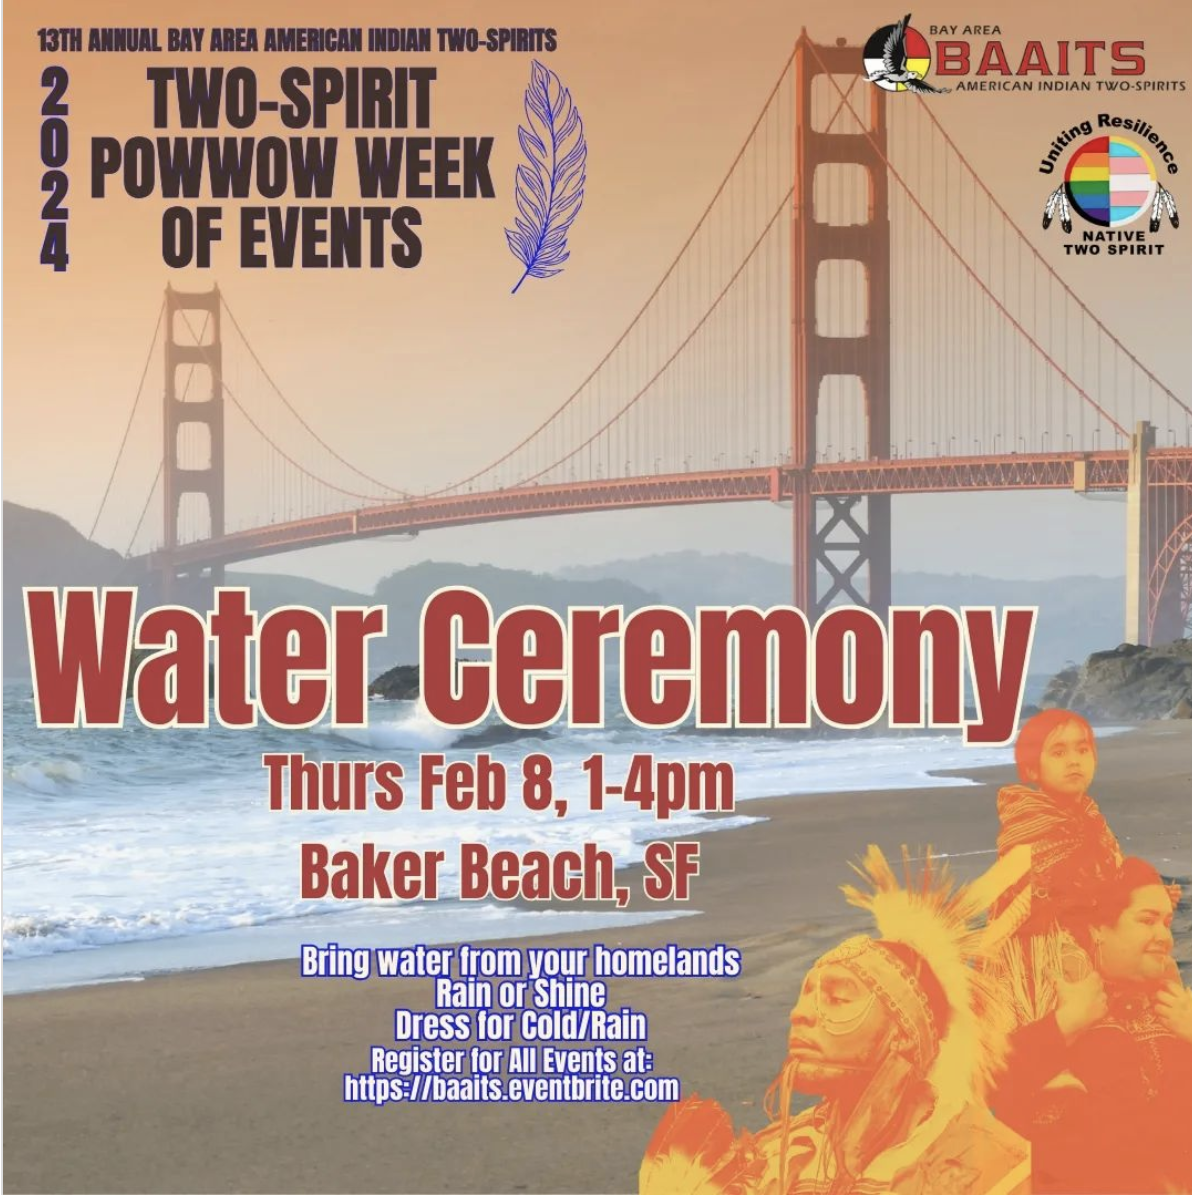 There is a background of the beach in the foreground with the image of the Golden Gate Bridge in the background, at sunset, . In the upper left corner is the logo of the 2024 powwow in purple that has three rows of text; the top row says, “13th Annual Bay Area American Indian Two-spirits” the medium row says, “Two Spirit Powwow” and the bottom text says, “February 10: Fort Mason Pavilion, SF”. To the left of these row of text is diagonal text that says, “2024” and to the right is a graphic of a white feather. In the middle of the graphic is text in red with a white outline, in 3 rows. The first row is in large text and says, "Water Ceremony". the second row is in smaller red text that says, "Thurs, Feb 8, 1-4PM; the third row is also in small text and says, "Baker Beach, SF". Underneath that are 5 rows of text in white with purple outline. The first row says, "Bring water from your homelands"; the second row says, "Rain or Shine"; the third row says, "Dress for cold/ rain"; the fourth row says, "Register for all events at:" and the fifth row says, "https://baaits.eventbrite.com". To the right of all this text are 2 graphics in the upper left corner; the first is the BAAITS organization logo, that has the medicine wheel with an eagle flying to the right on top of it to the left; the middle of the logo has black text on top that says, "Bay Area", red text in the middle in larger letters that says, "BAAITS' with smaller black text underneath that bends downward and says, "American Indian Two Spirits." Under that logo is another logo that has text above a circle in black that says, "Uniting Resilience", a graphic of a circle in the middle that is split in half inside of it with the rainbow flag to the left and the trans flag to the right. On the outside of either side of the circle are small images of feathers attached to it. Underneath is small black text in two stacks that says, "Native; Two Spirit". Underneath both logos is the image of an auntie holding a child on their shoulders, both in regalia, in orange coloring, facing to the right and the image of a male presenting dancer in regalia in orange coloring, facing to the left